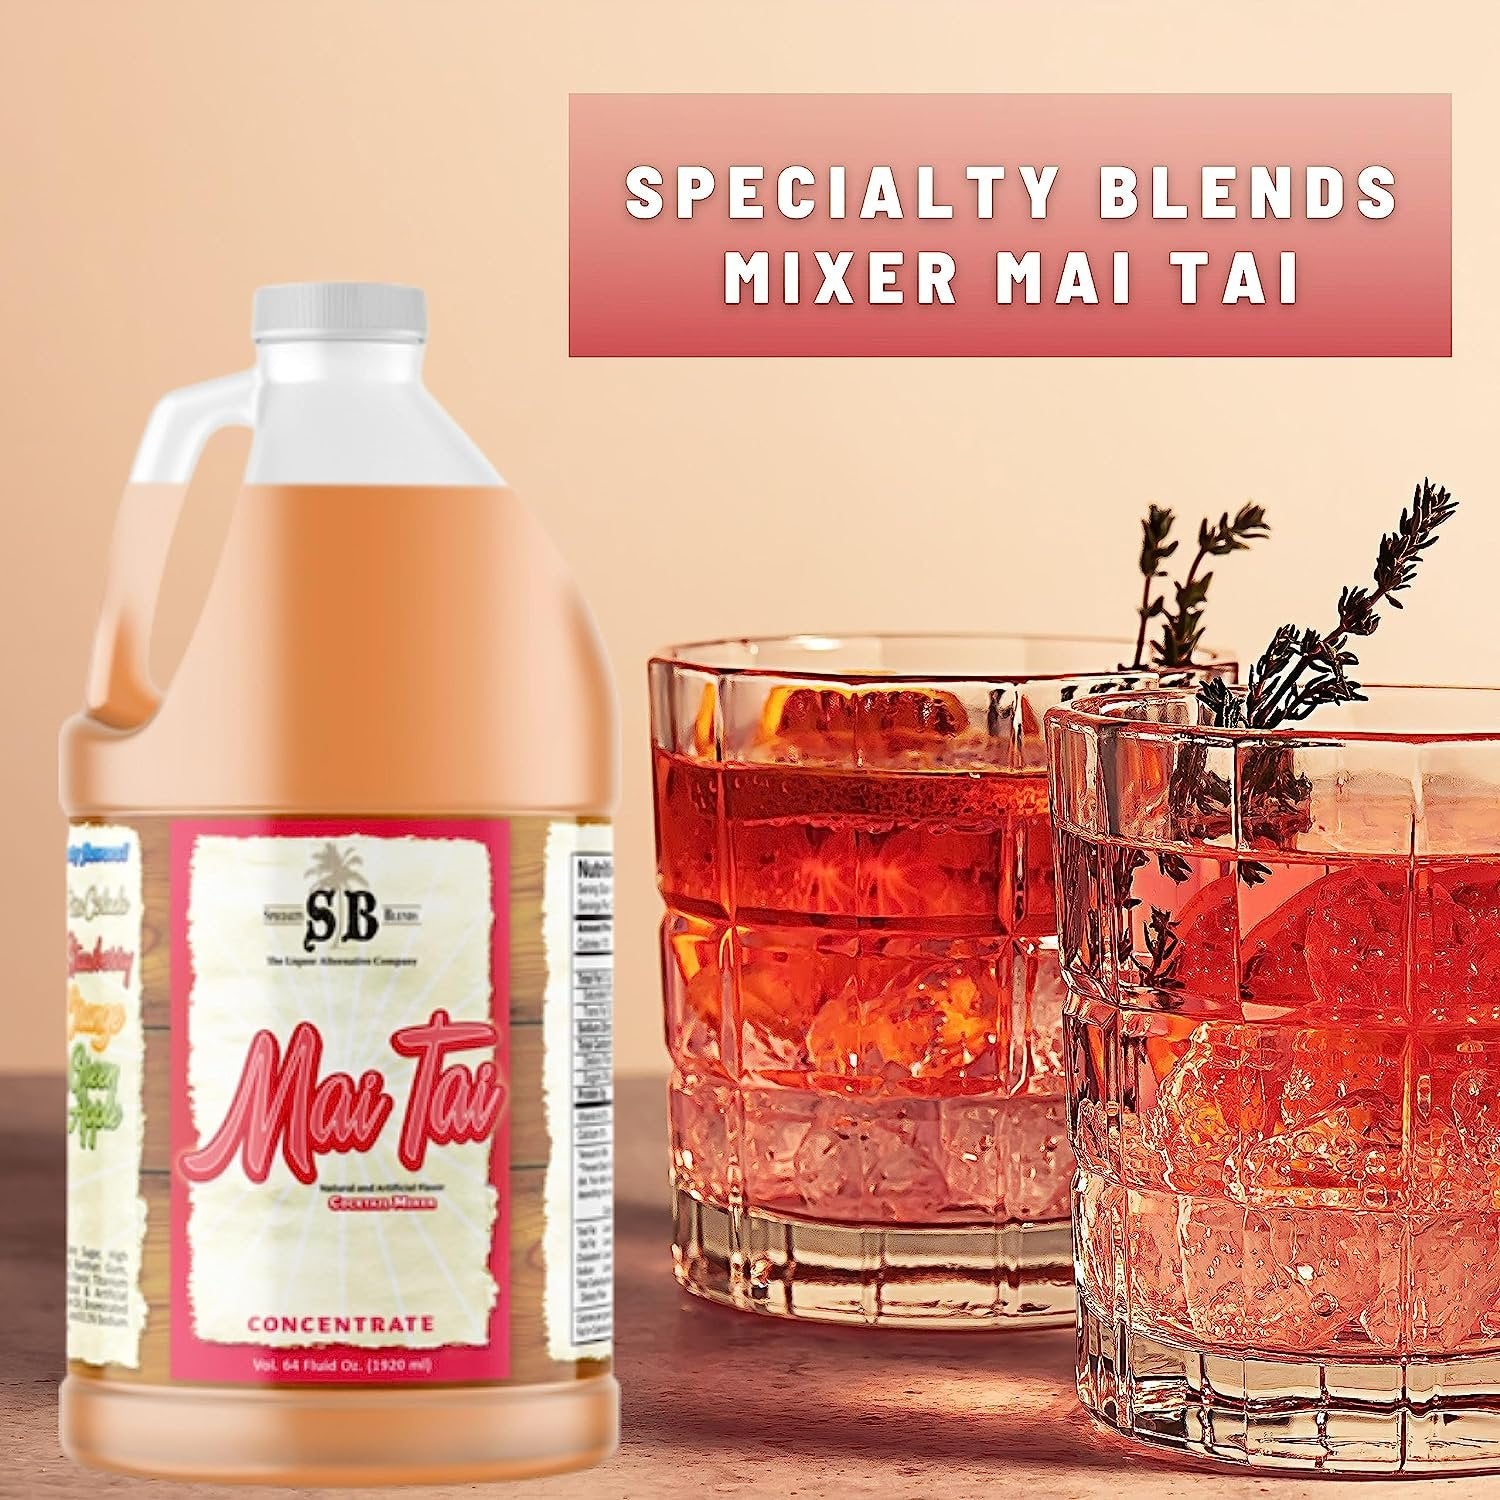 Specialty Blends Mai Tai Flavored Syrup Cocktail Mixer Concentrate, Made with Organic Mai Tai Flavor Syrups For Drinks, 1/2 Gallon (Pack of 1) - with Bonus Worldwide Nutrition Multi Purpose Key Chain